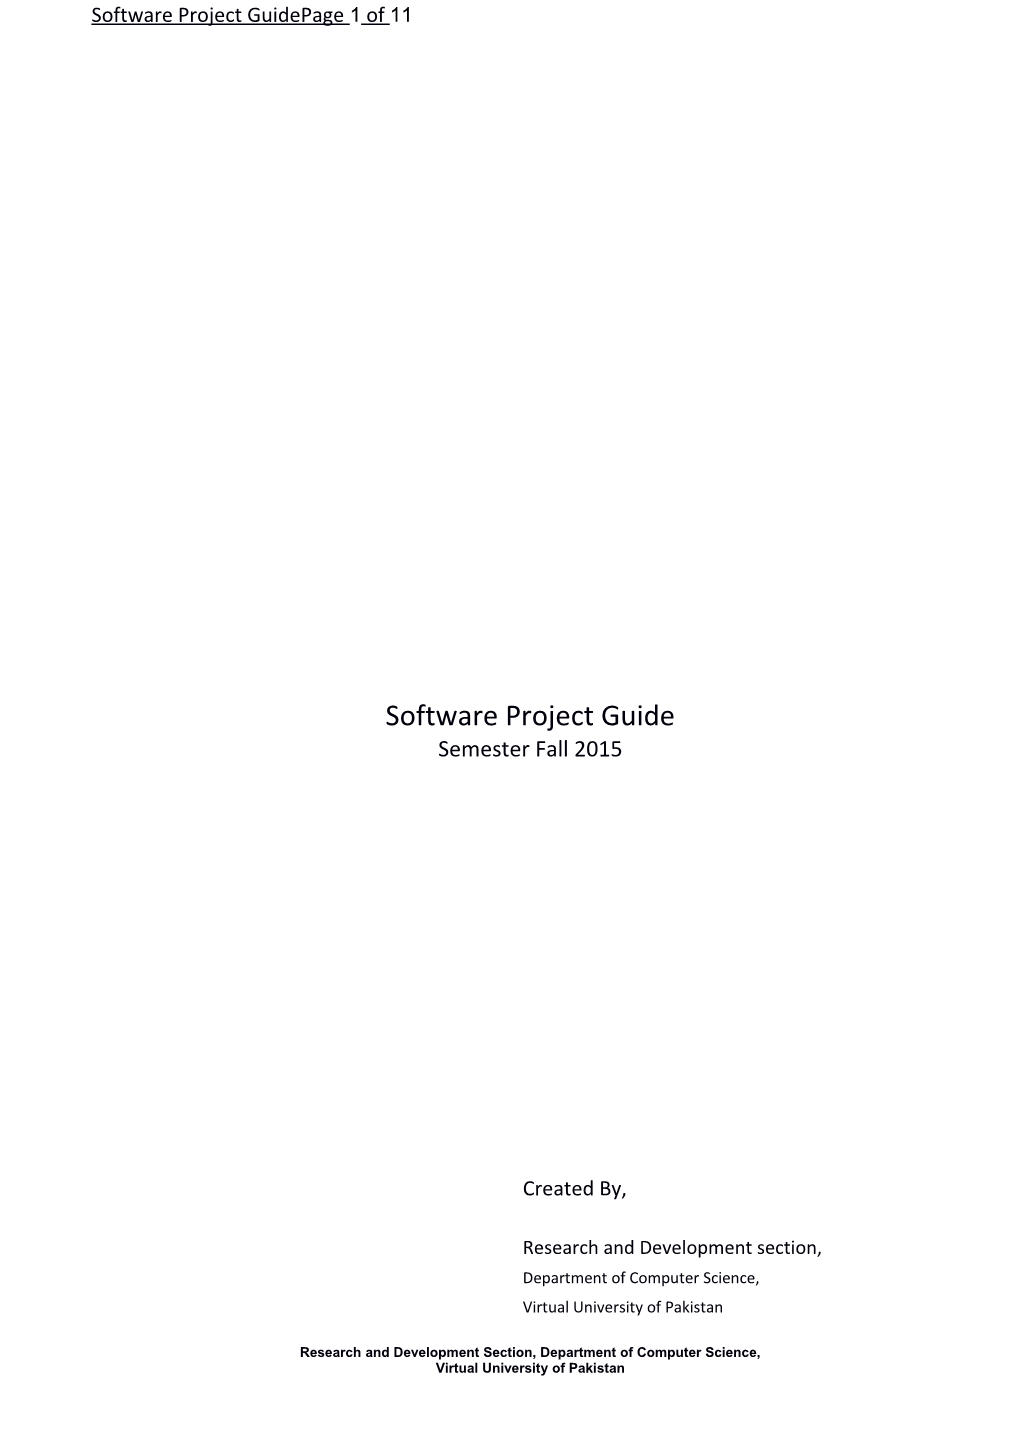 Software Project Guidepage 11 of 11